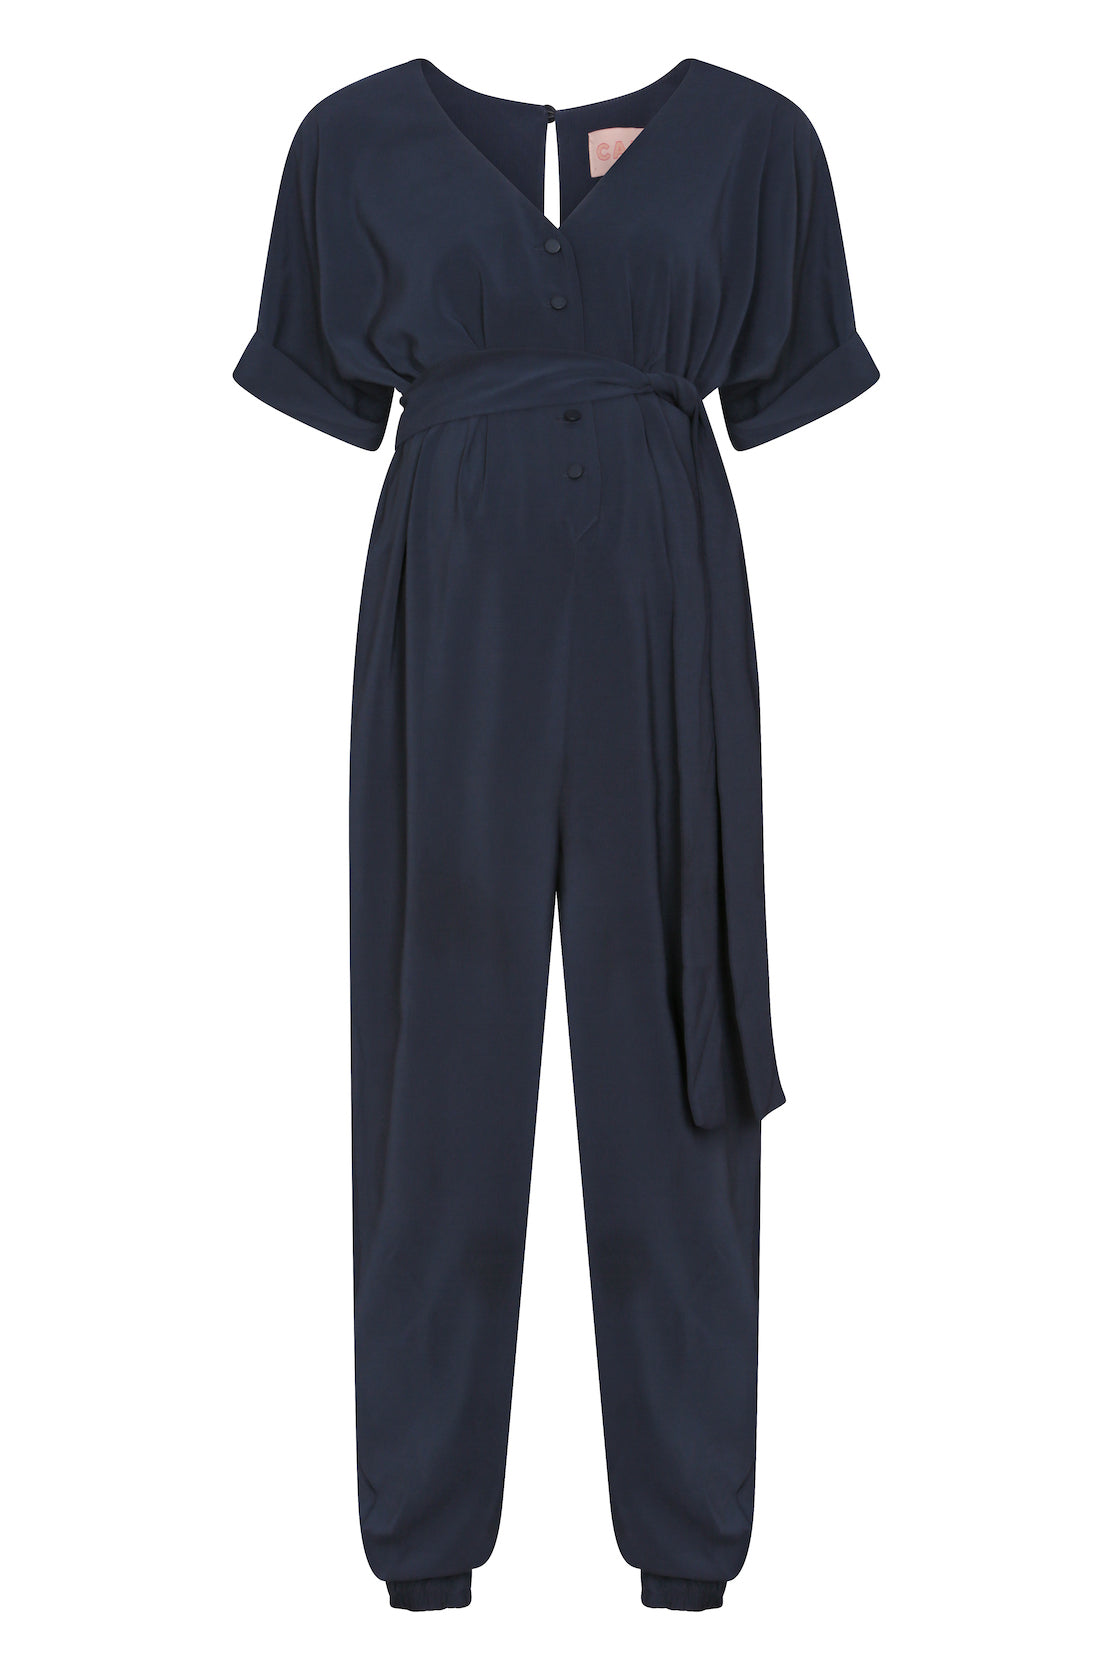 Harem-style maternity jumpsuit, your ‘must-have’ wardrobe piece for an elevated every-day or maternity workwear option. In midnight navy, it is easy to wear for pregnancy, breastfeeding and afterwards. Cleverly designed to offer versatile style options as you evolve through the stages. The V-neck and front button features ensure this is a breastfeeding-friendly jumpsuit for new mums, while the loose fit and cuffed trousers style is so flattering postpartum.